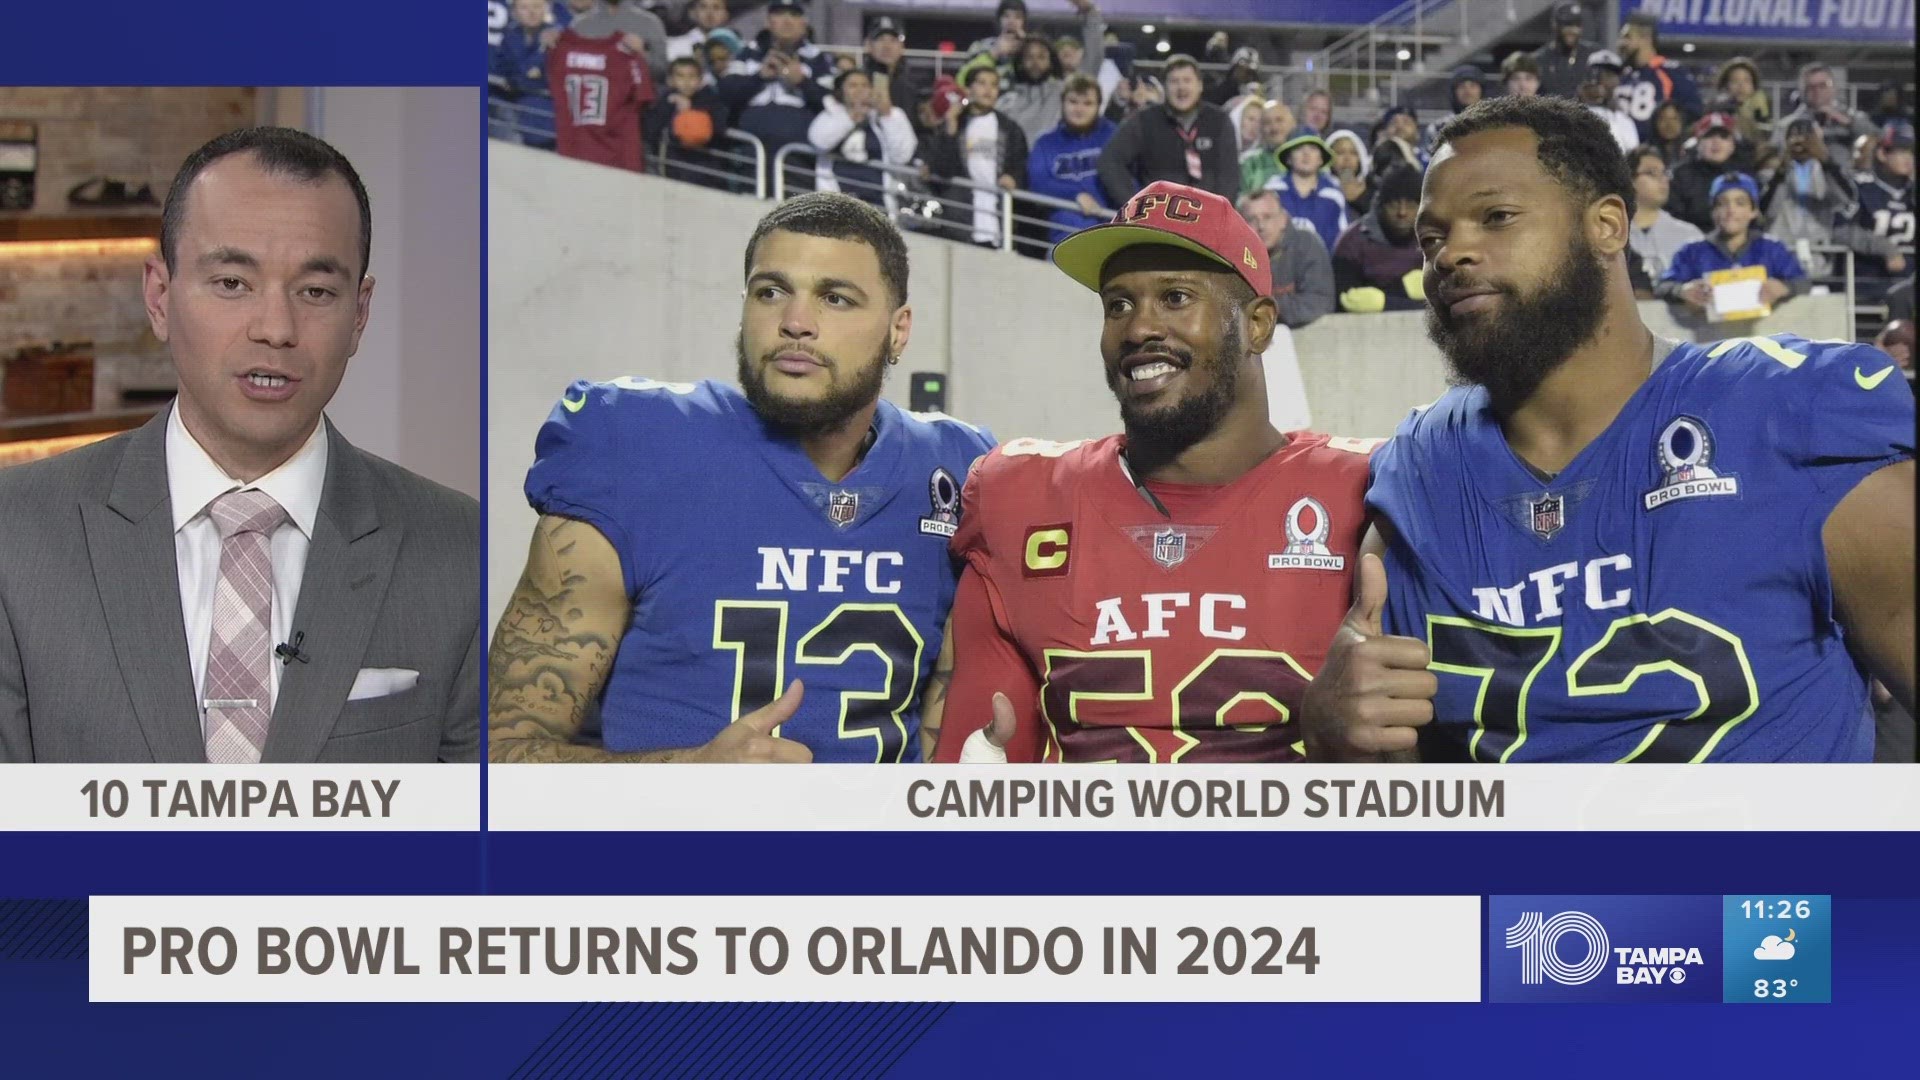 New-look NFL Pro Bowl is coming back to Orlando in February